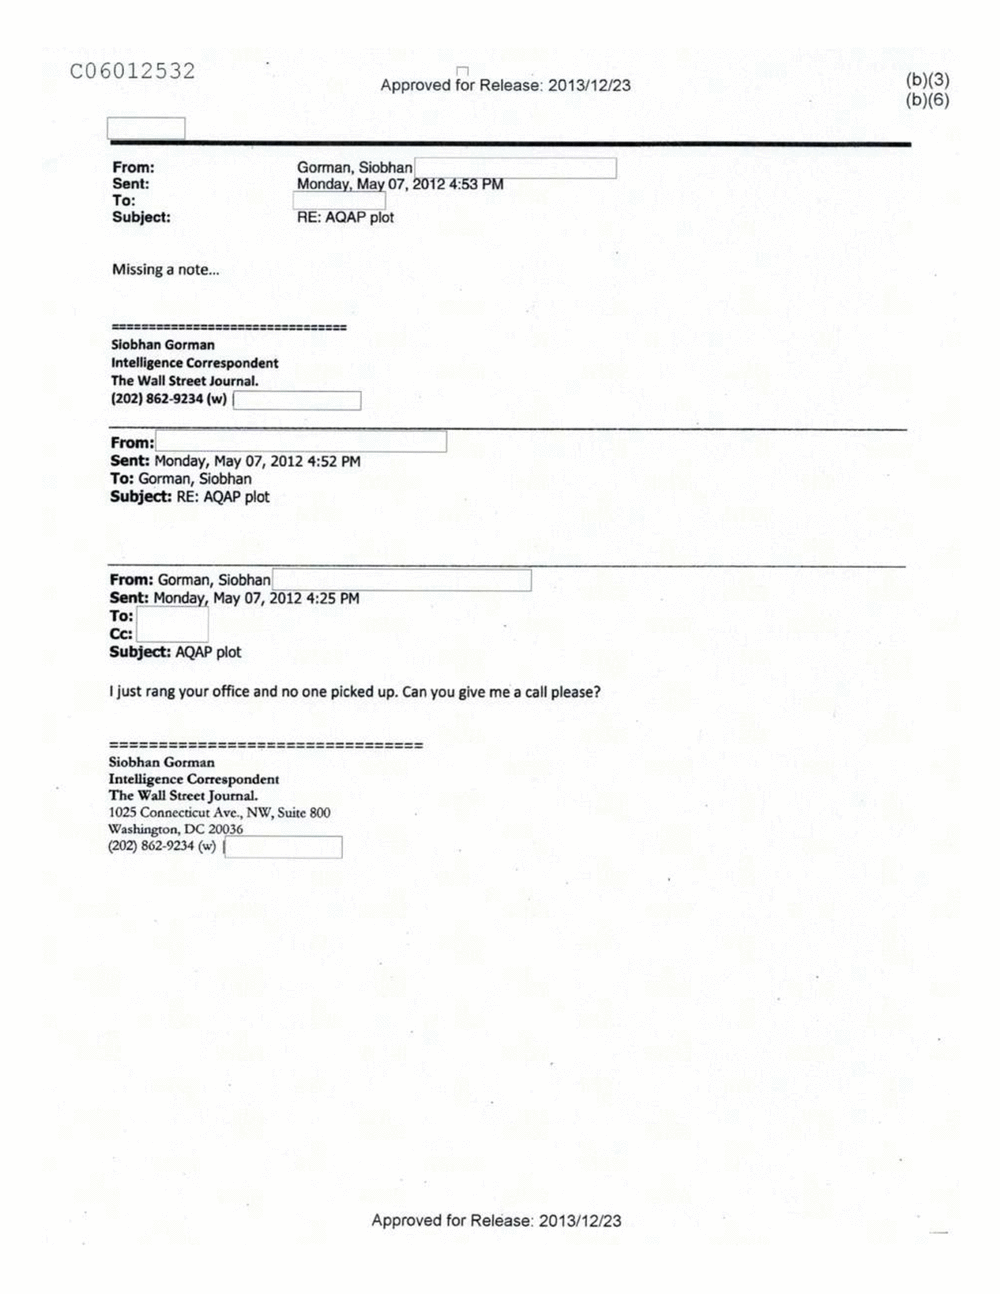 Page 62 from Email Correspondence Between Reporters and CIA Flacks